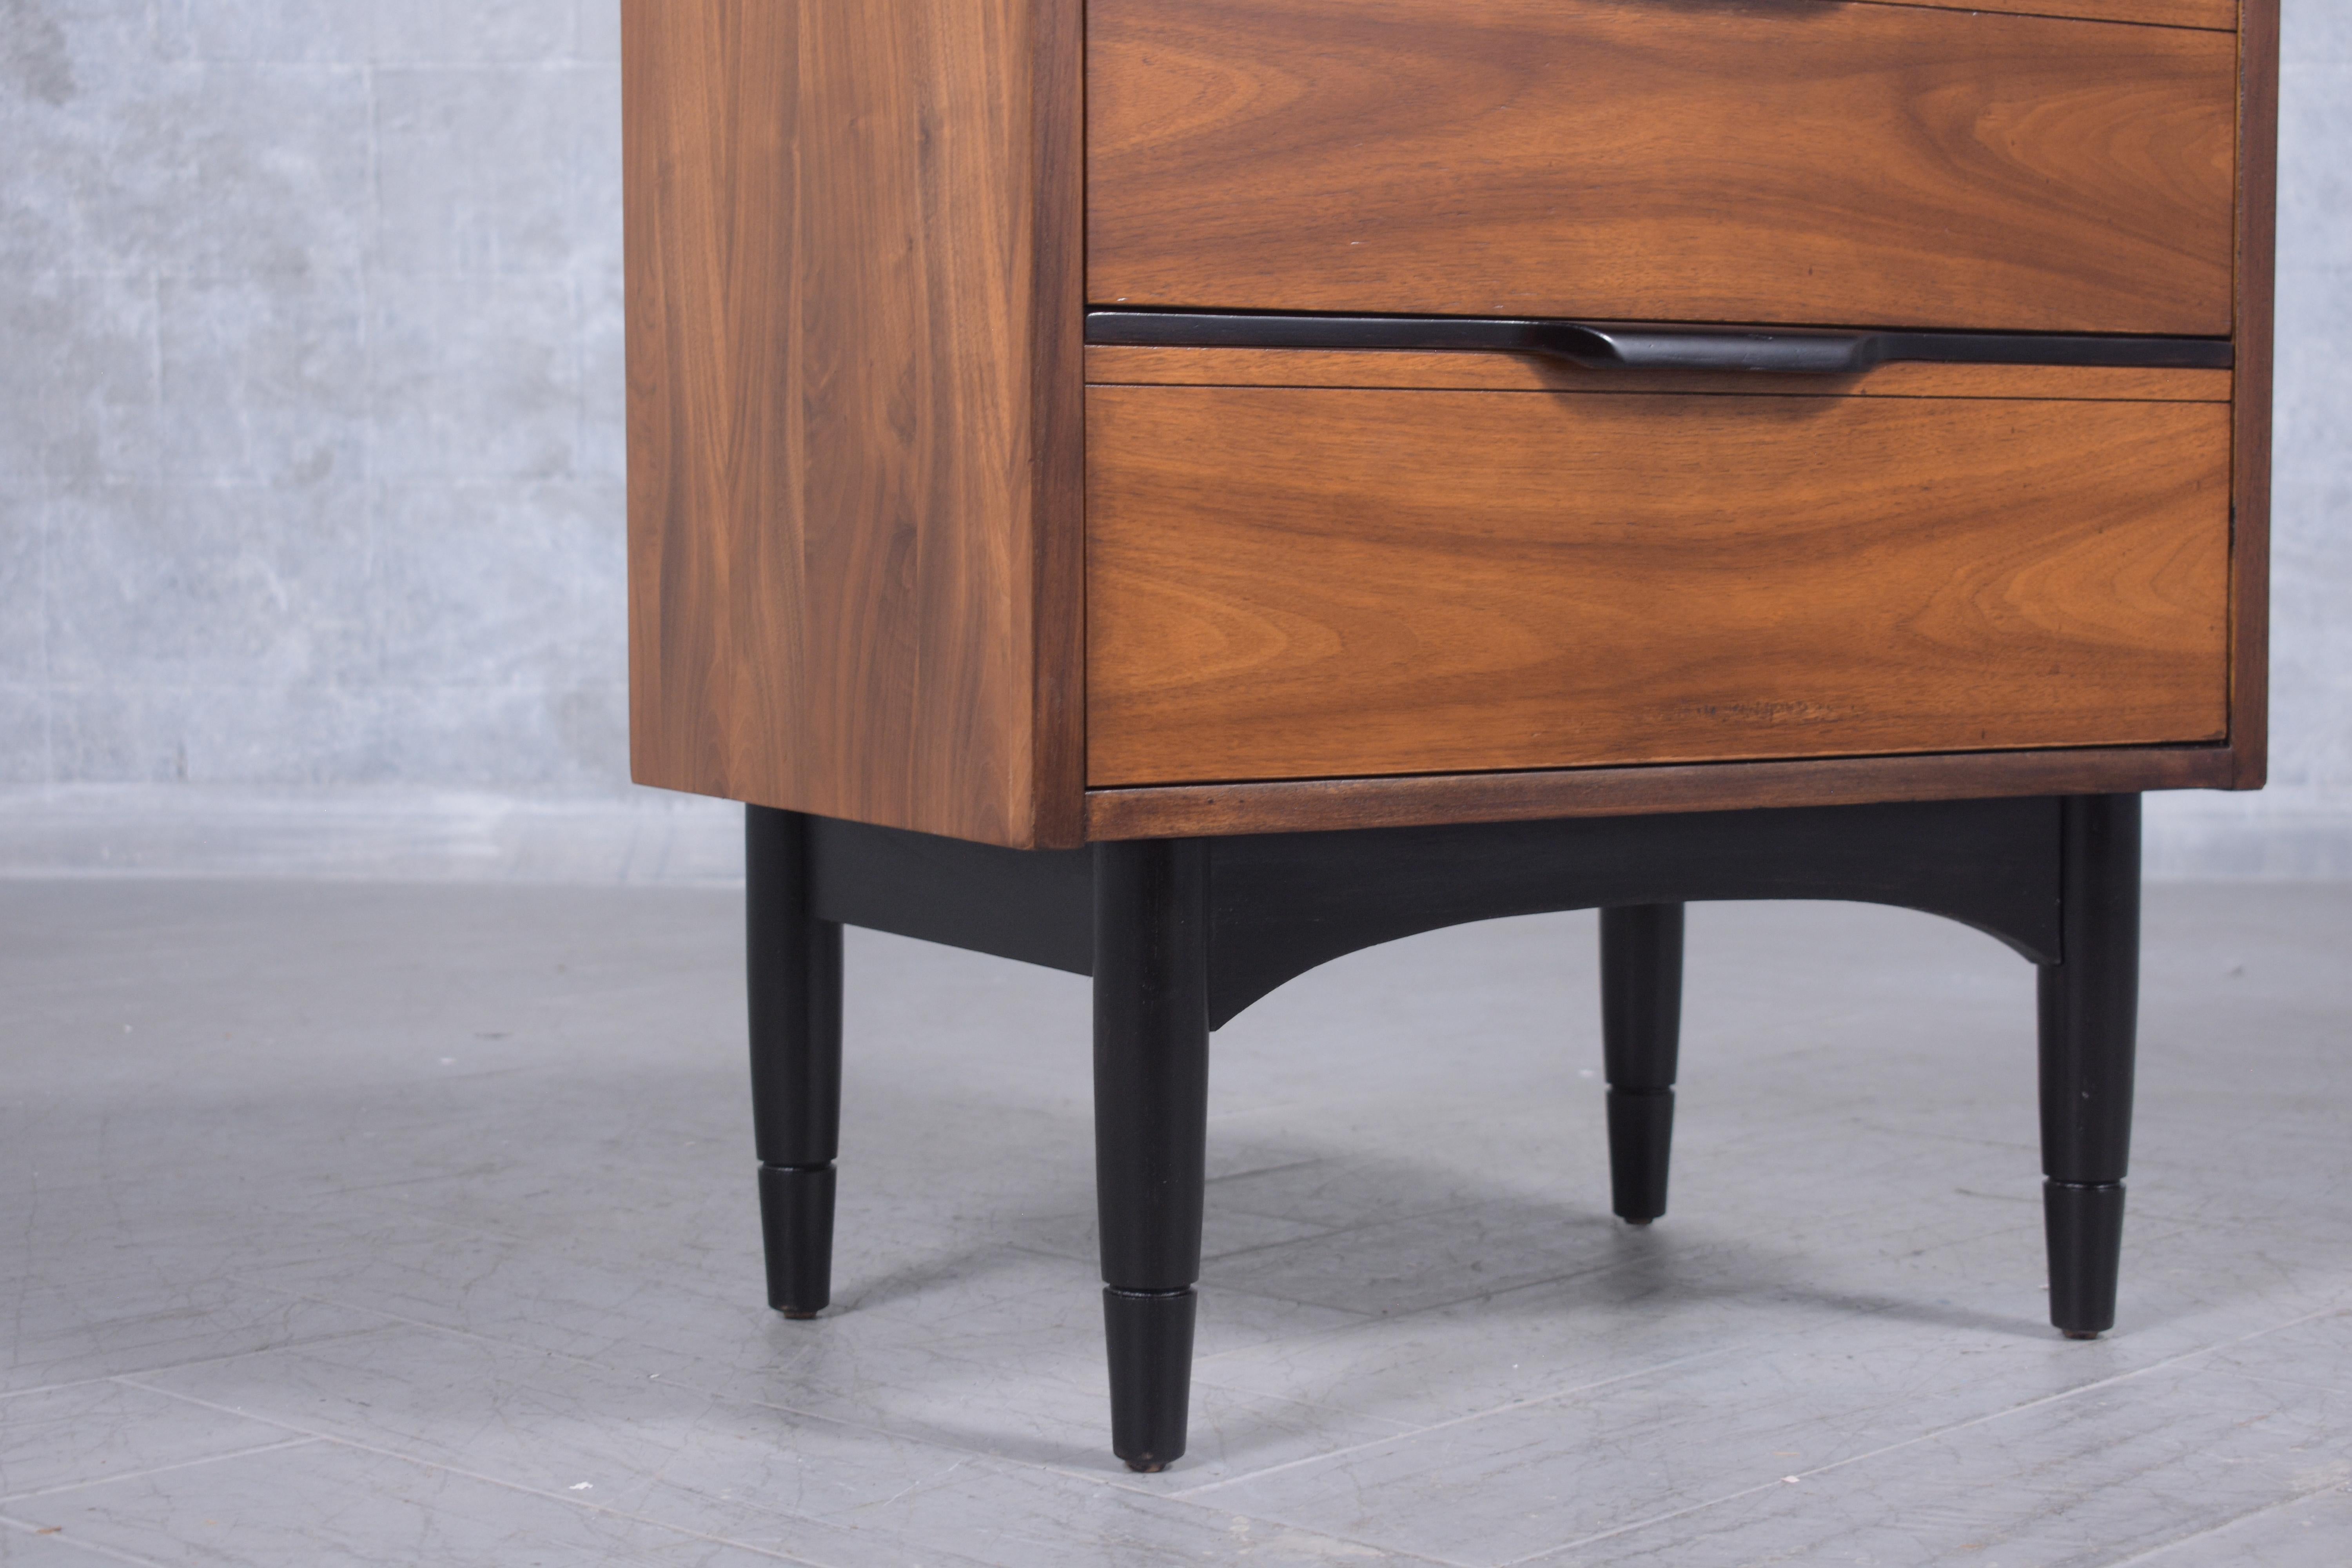 1960s Mid-Century Modern Walnut Nightstand: Ebonized Finish with Carved Details For Sale 4